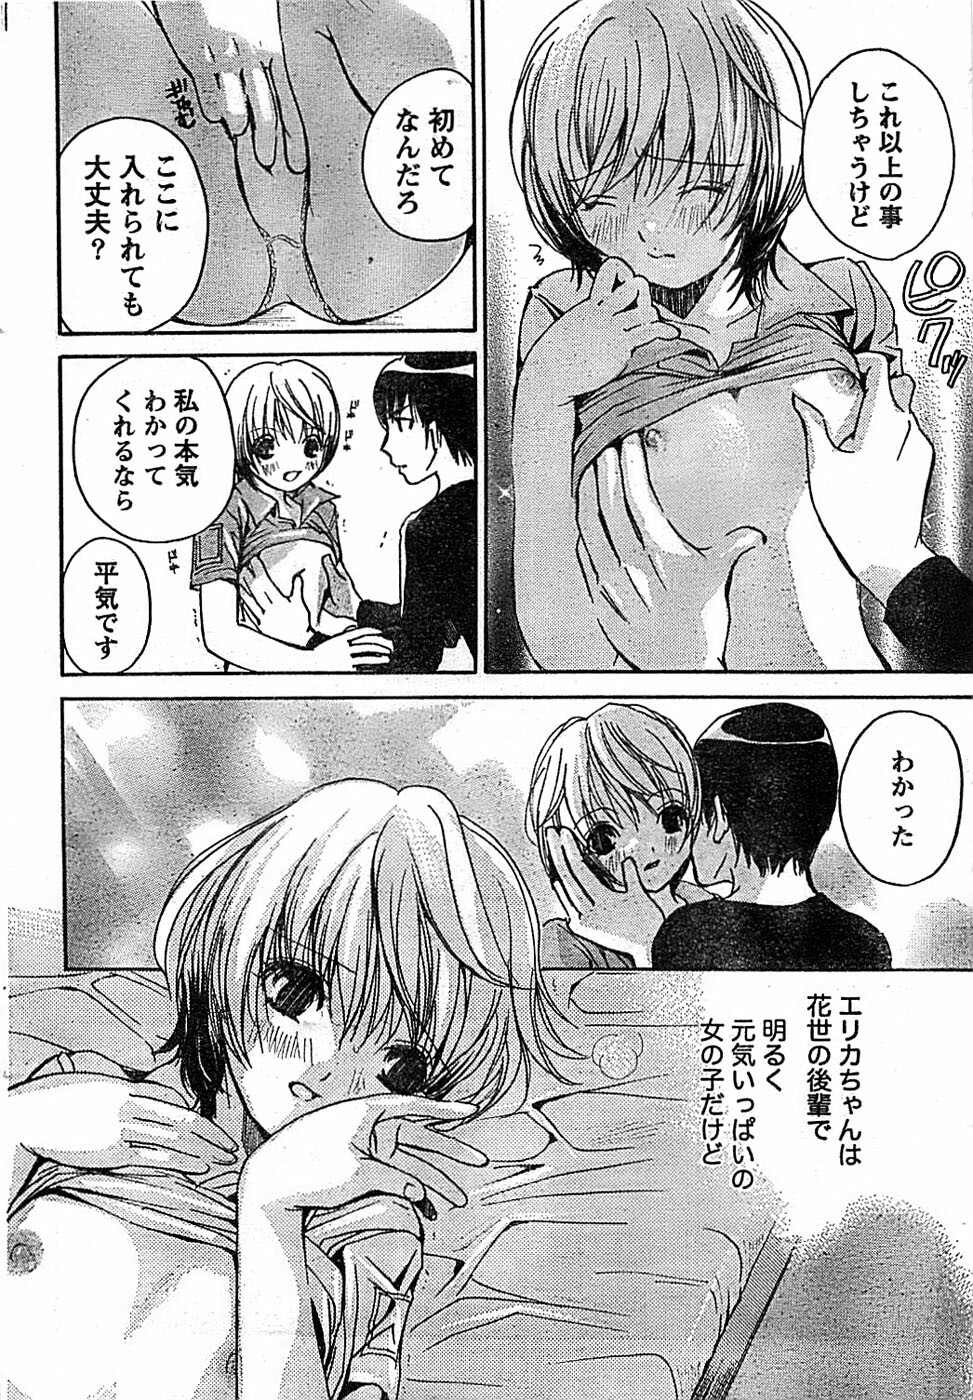 Doki! Special 2008-01 page 50 full